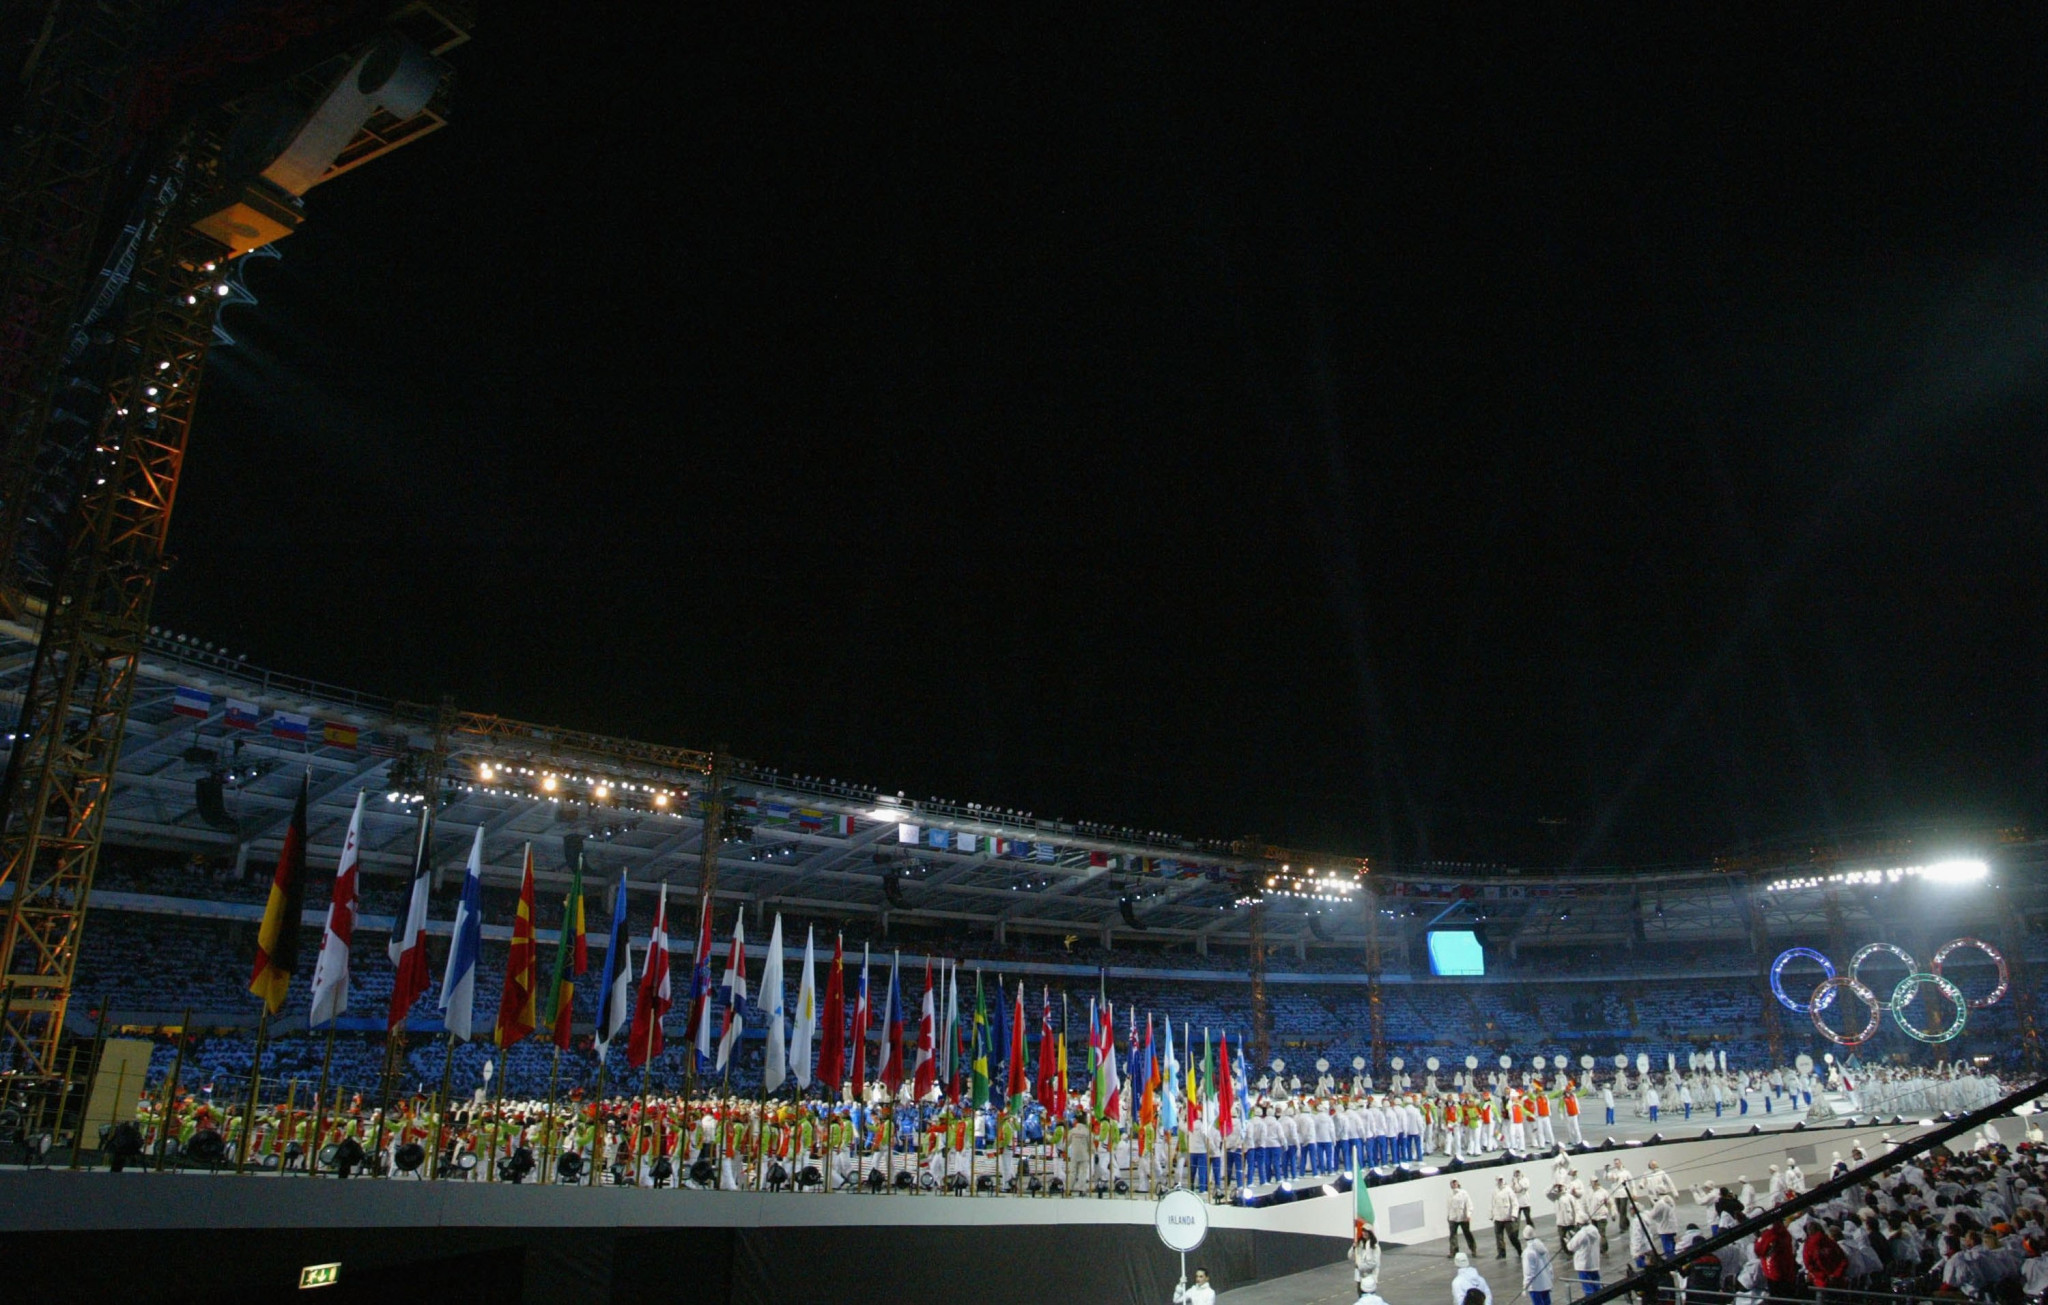 Turin hosted the 2006 Winter Olympics but is expected to play a much smaller role in 2026 ©Getty Images